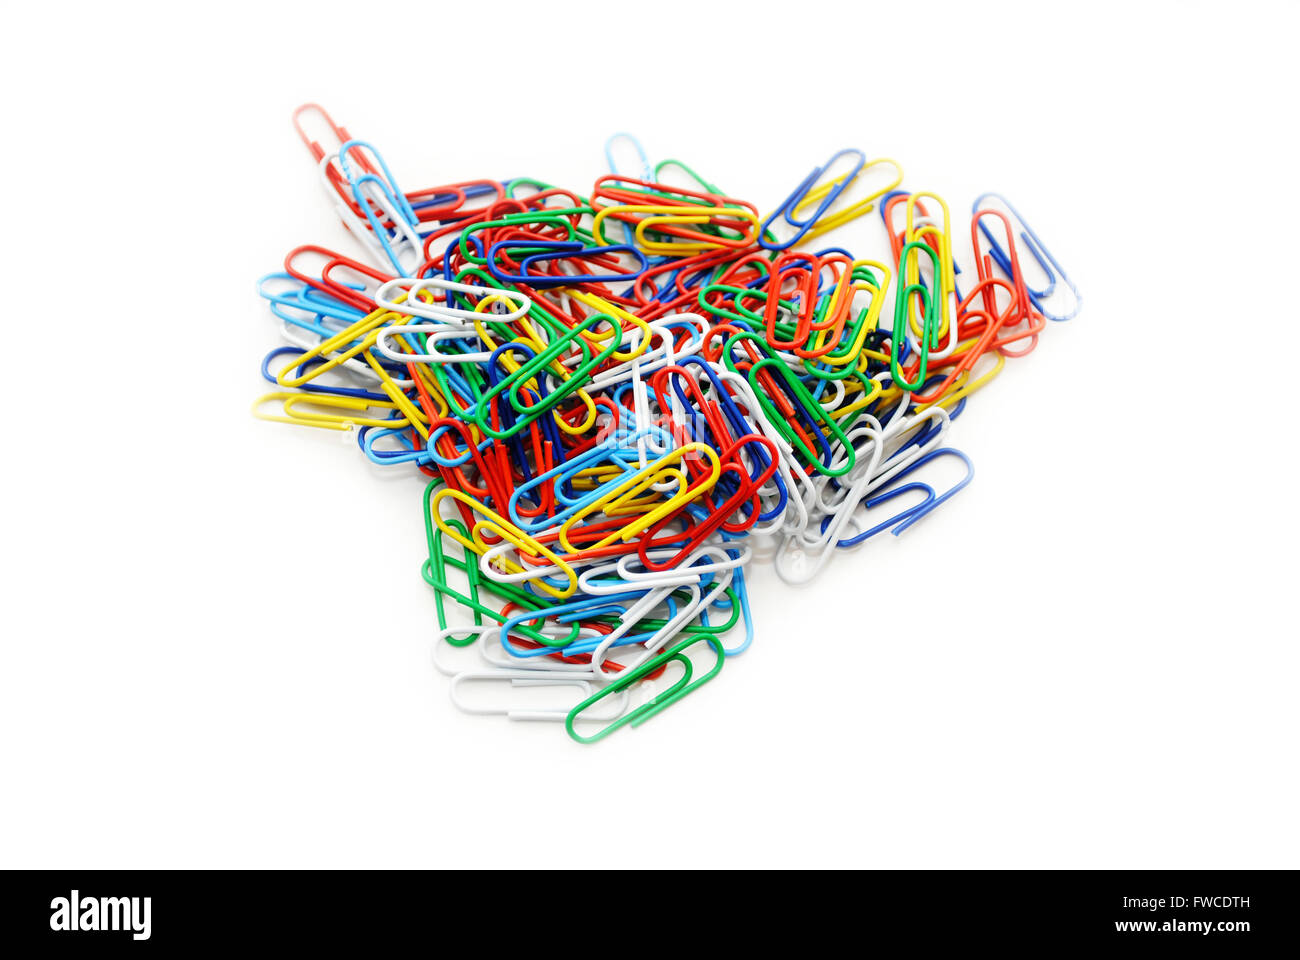 A Pile of Colorful Paper Clips on White Stock Photo